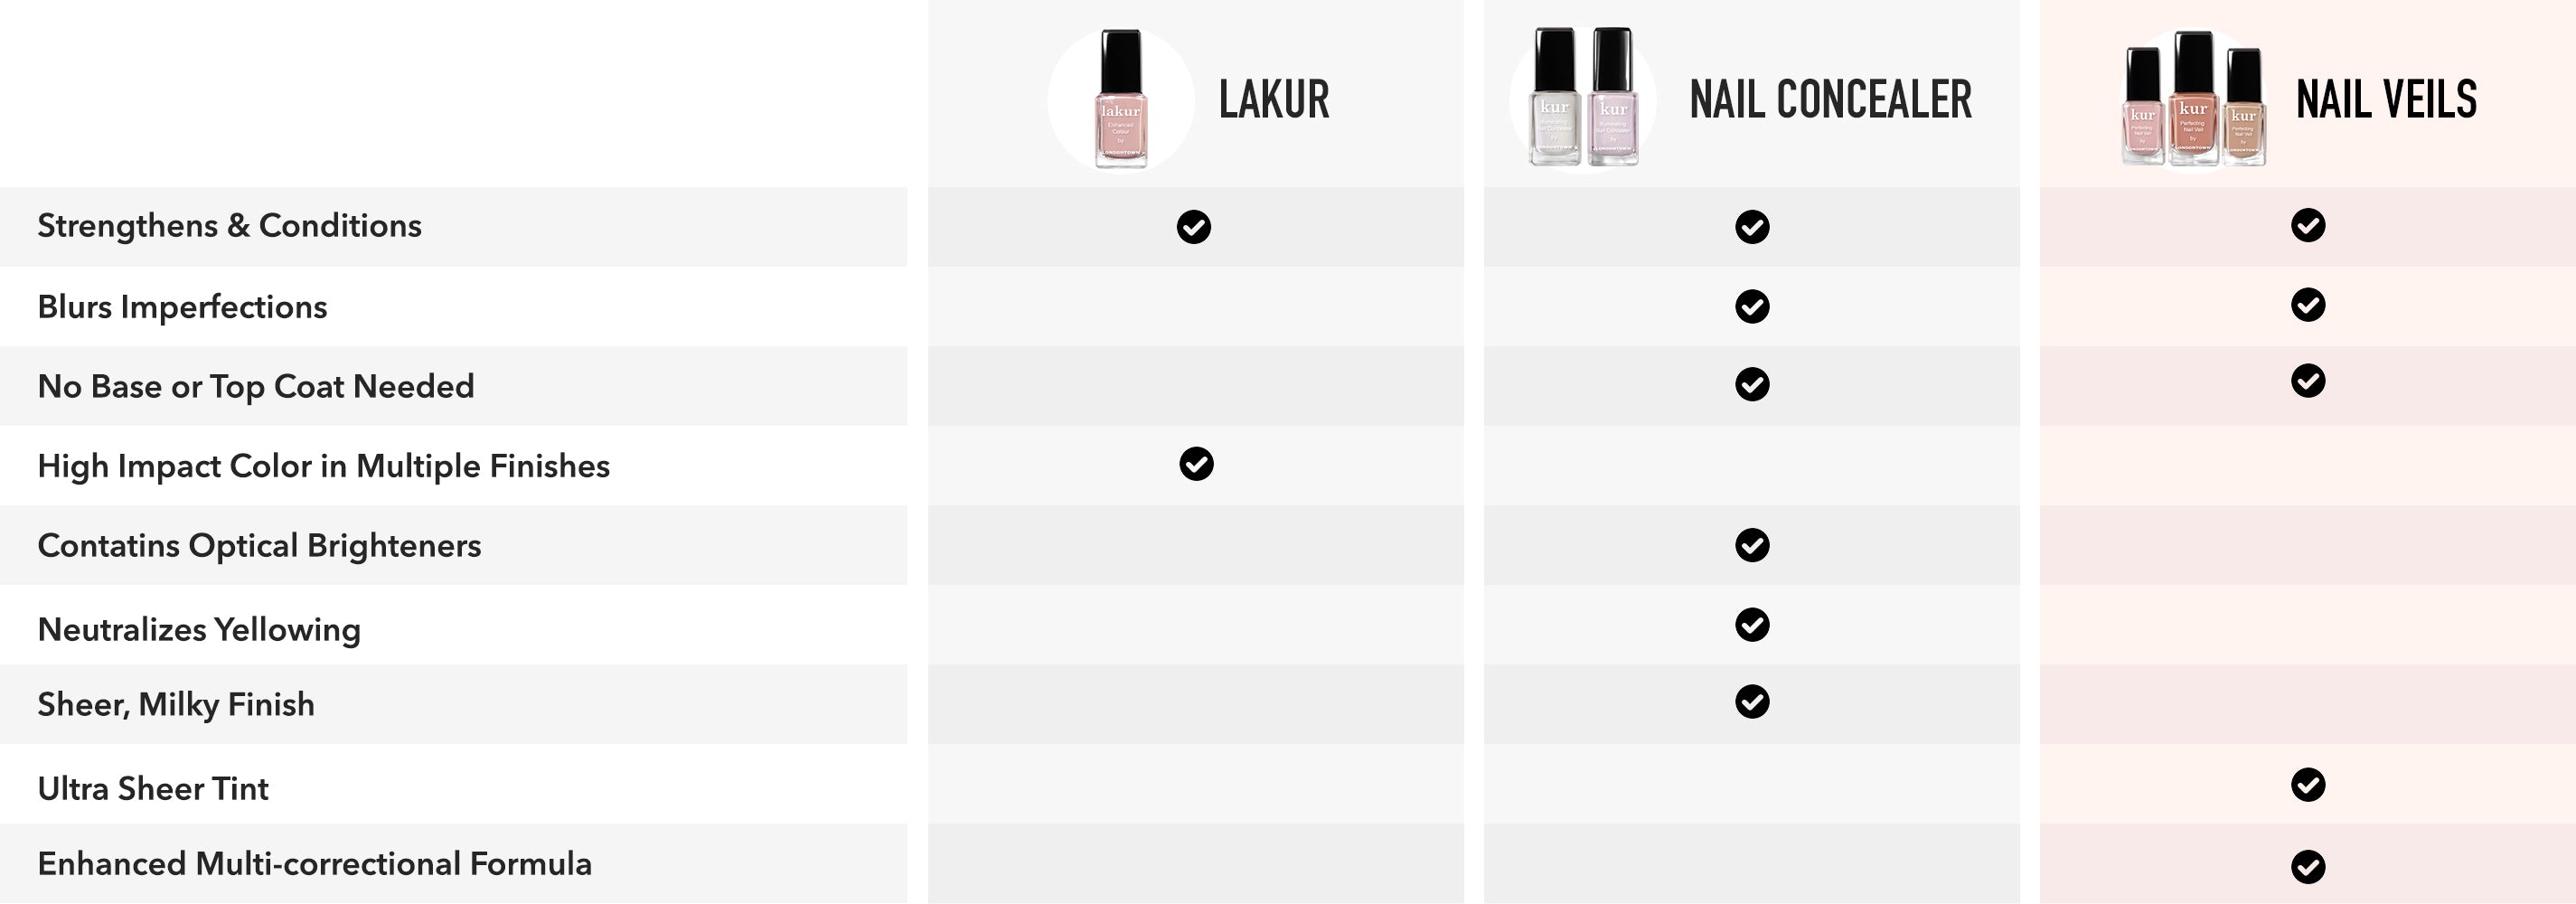 Comparison Chart for Nail Concealer